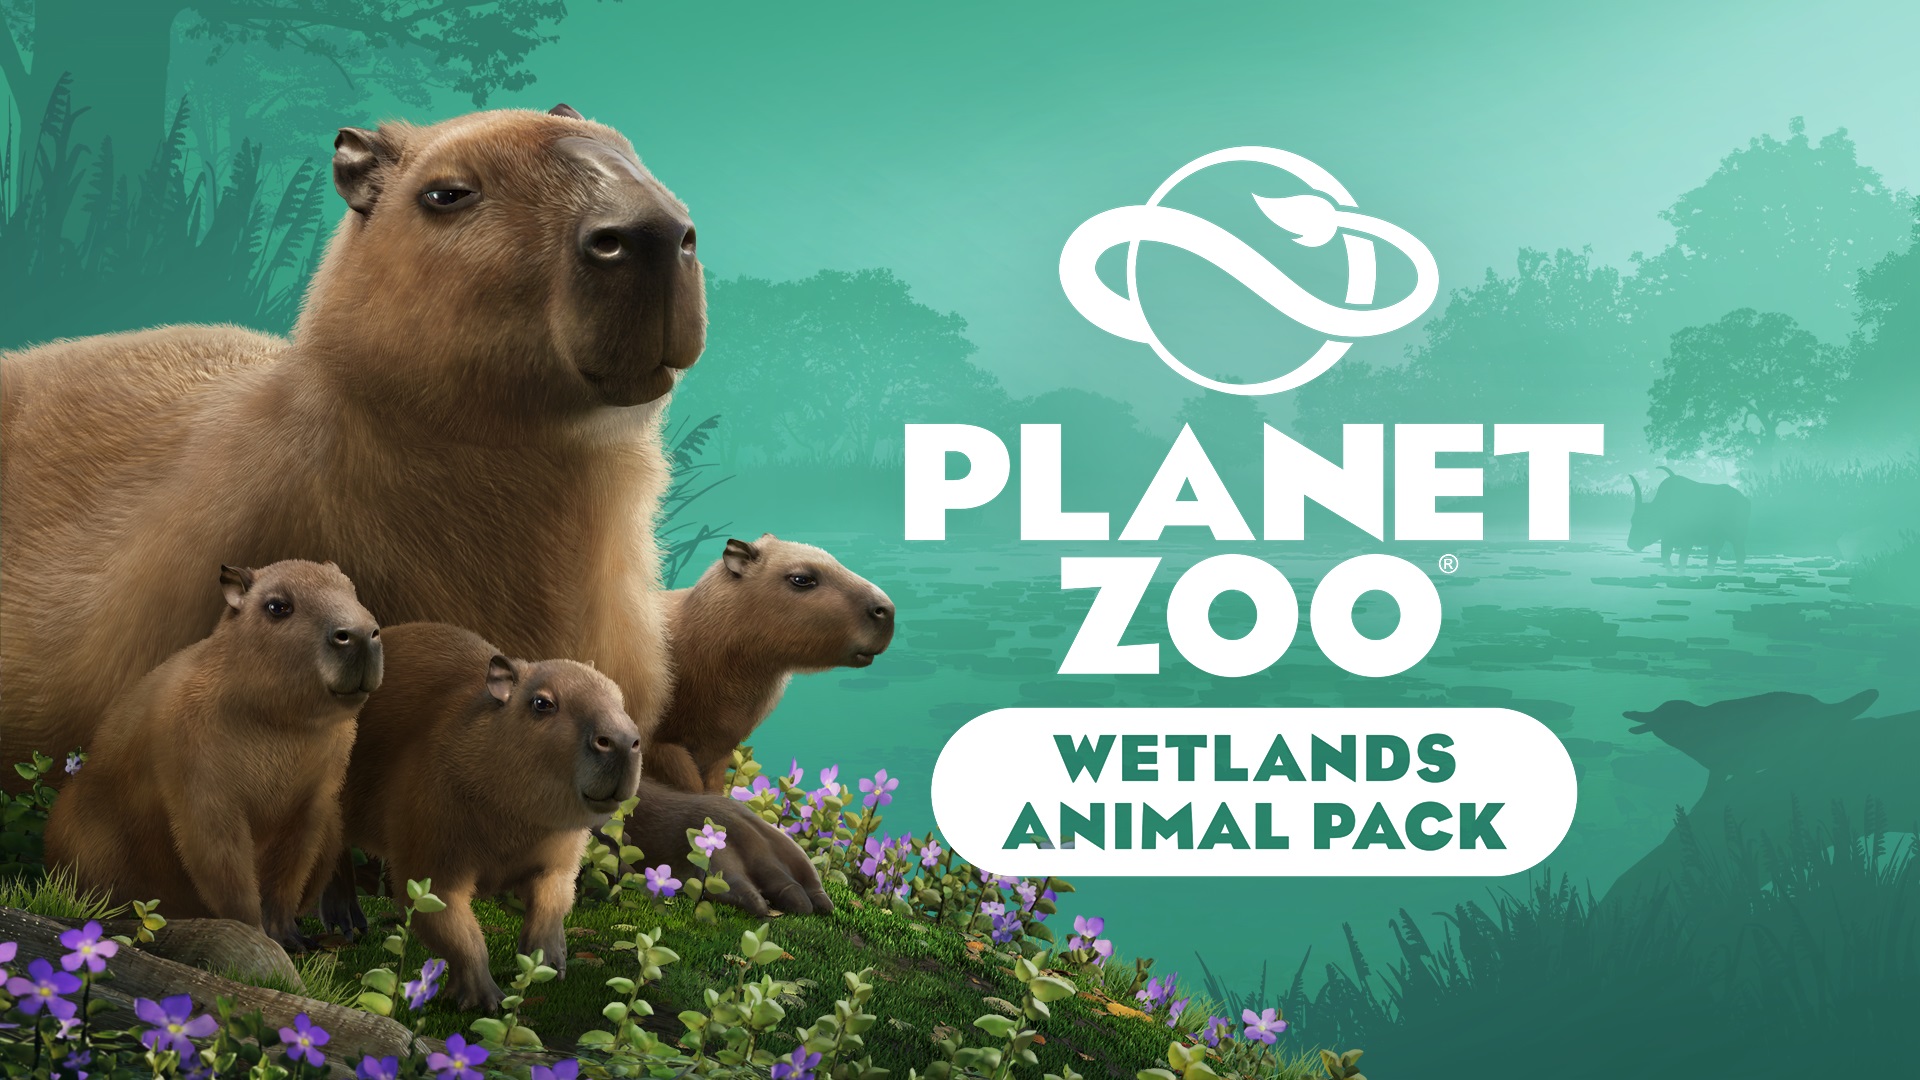 Planet Zoo: Wetlands Animal Pack adds eight river-loving animals